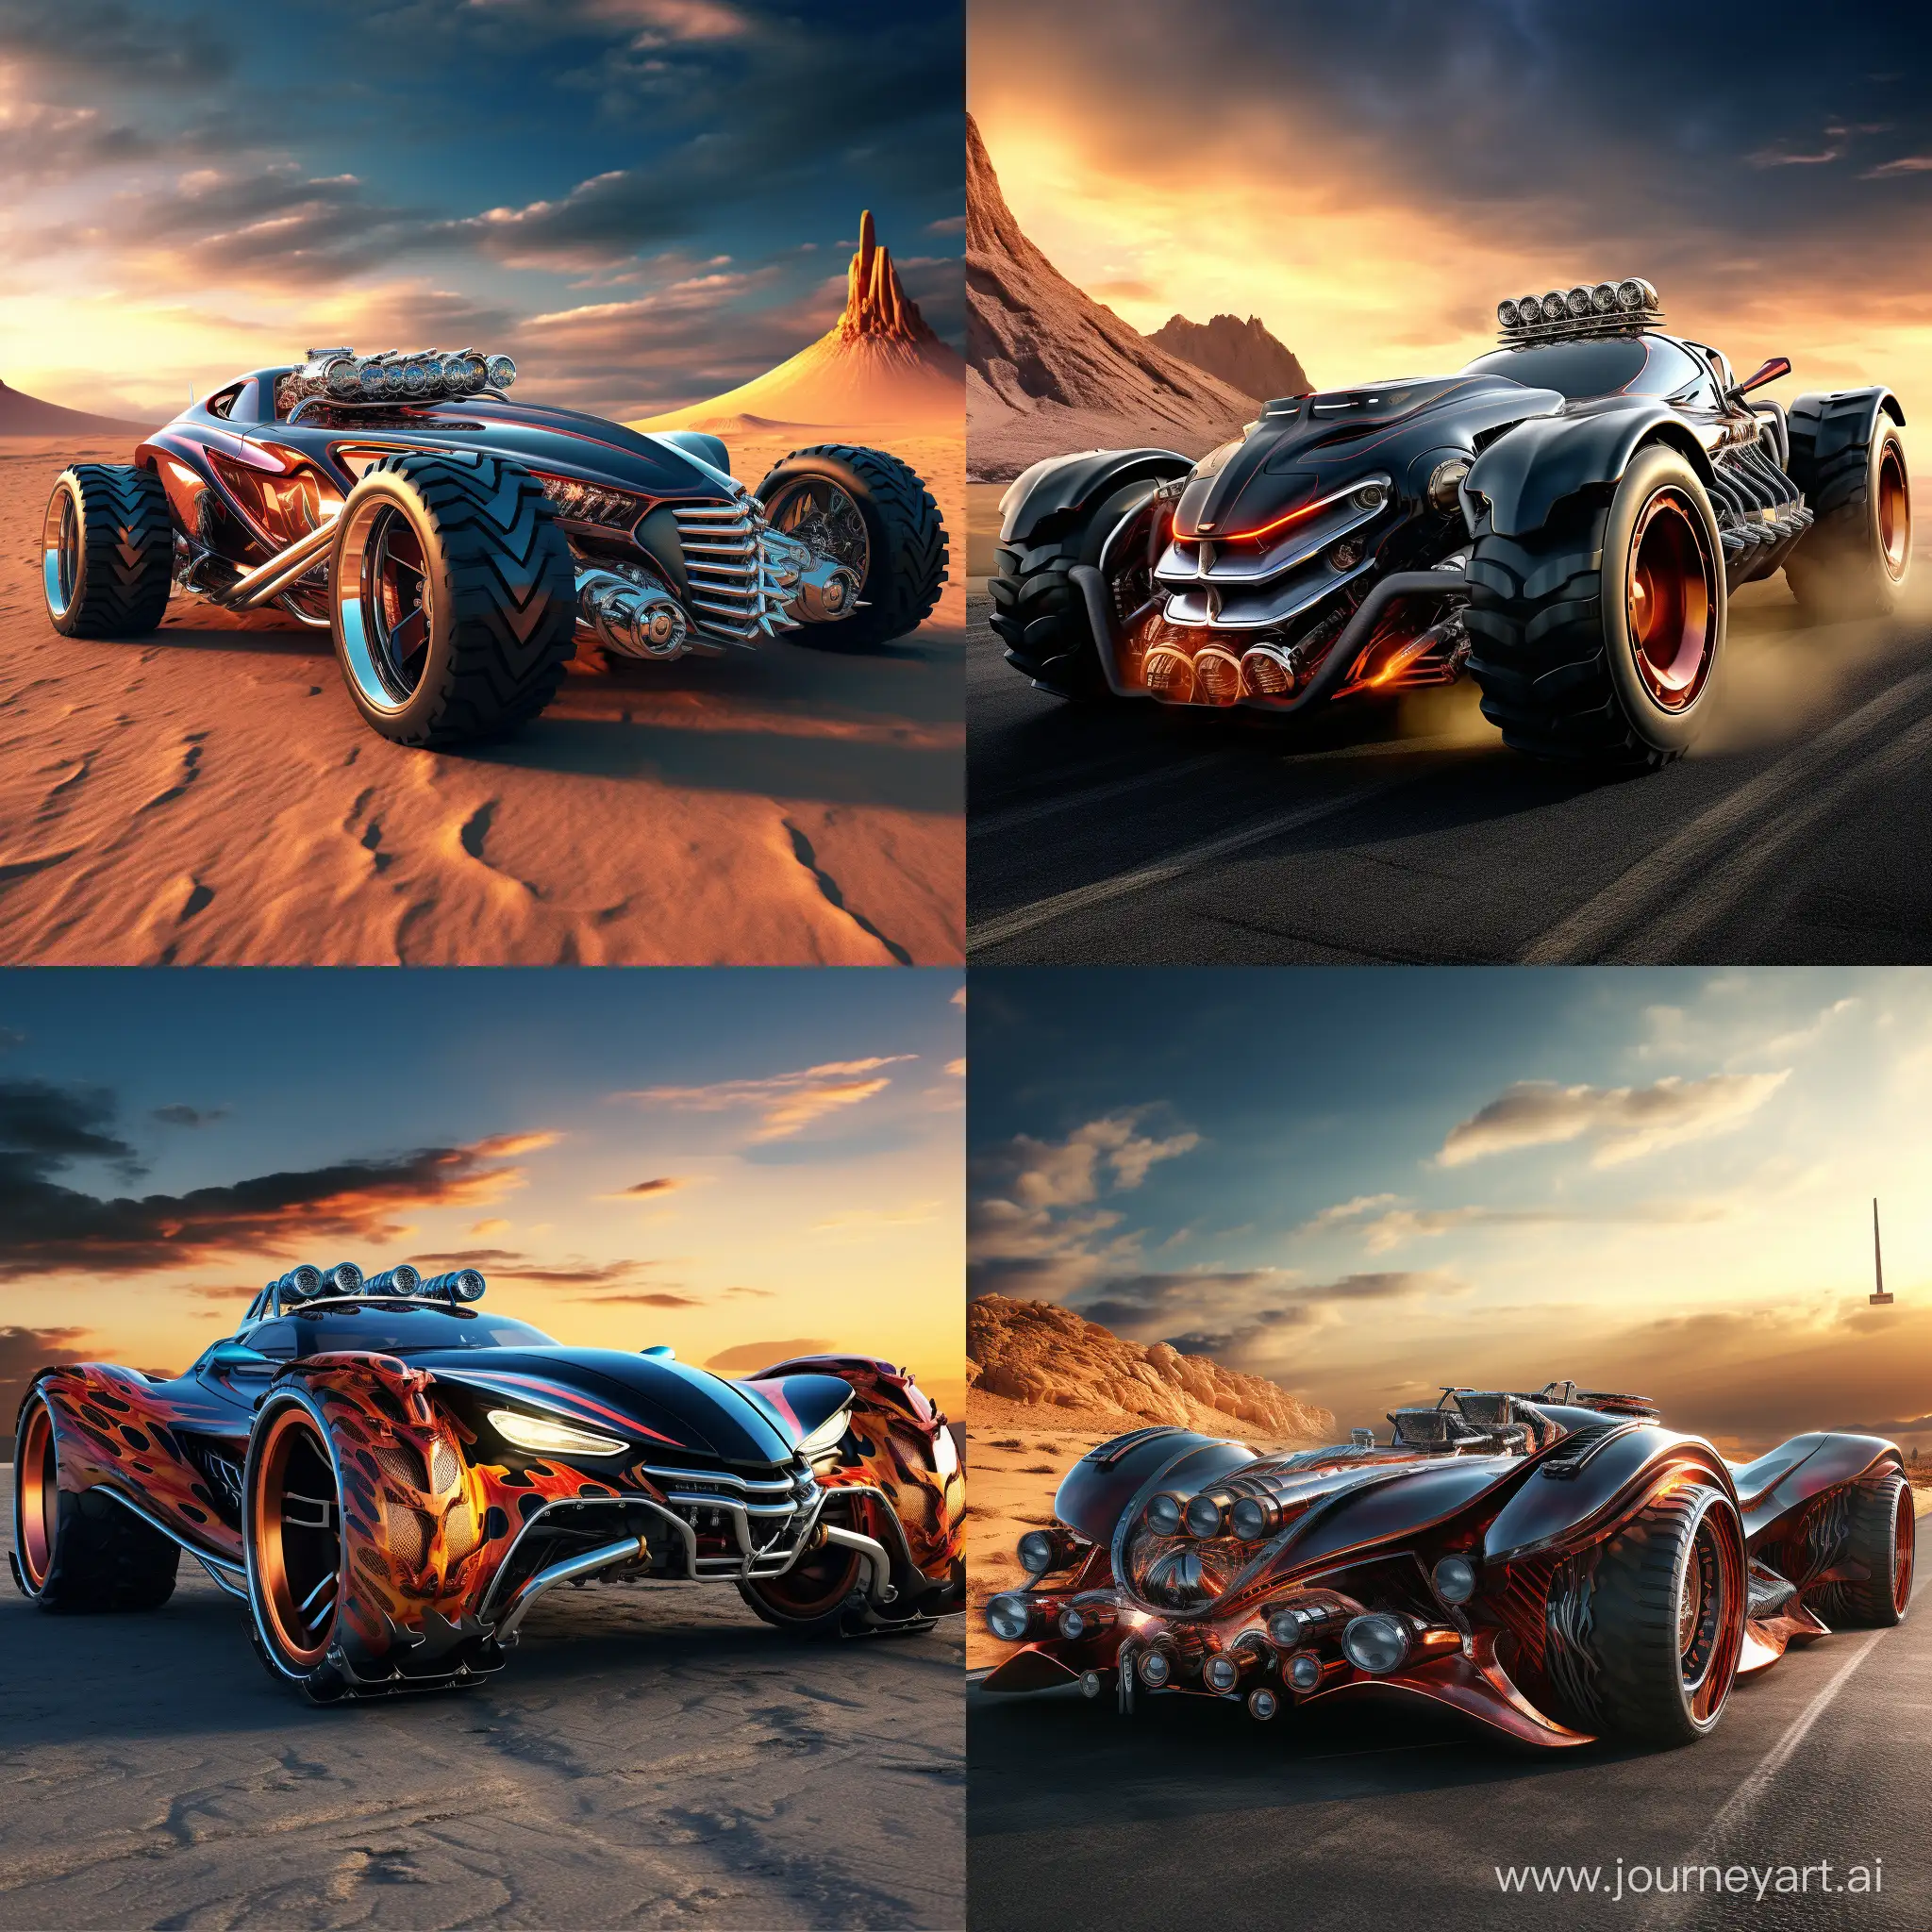 An extreme sports car. It has an elaborate custom, fire, chrome, and black auto design. A horned devil is pushing the car. The engine is oversized, and has a chrome, overhead air breather, extruding from the front hood. The suspension is supported by monster truck tires with chrome rims. The road and the vehicle are on fire.